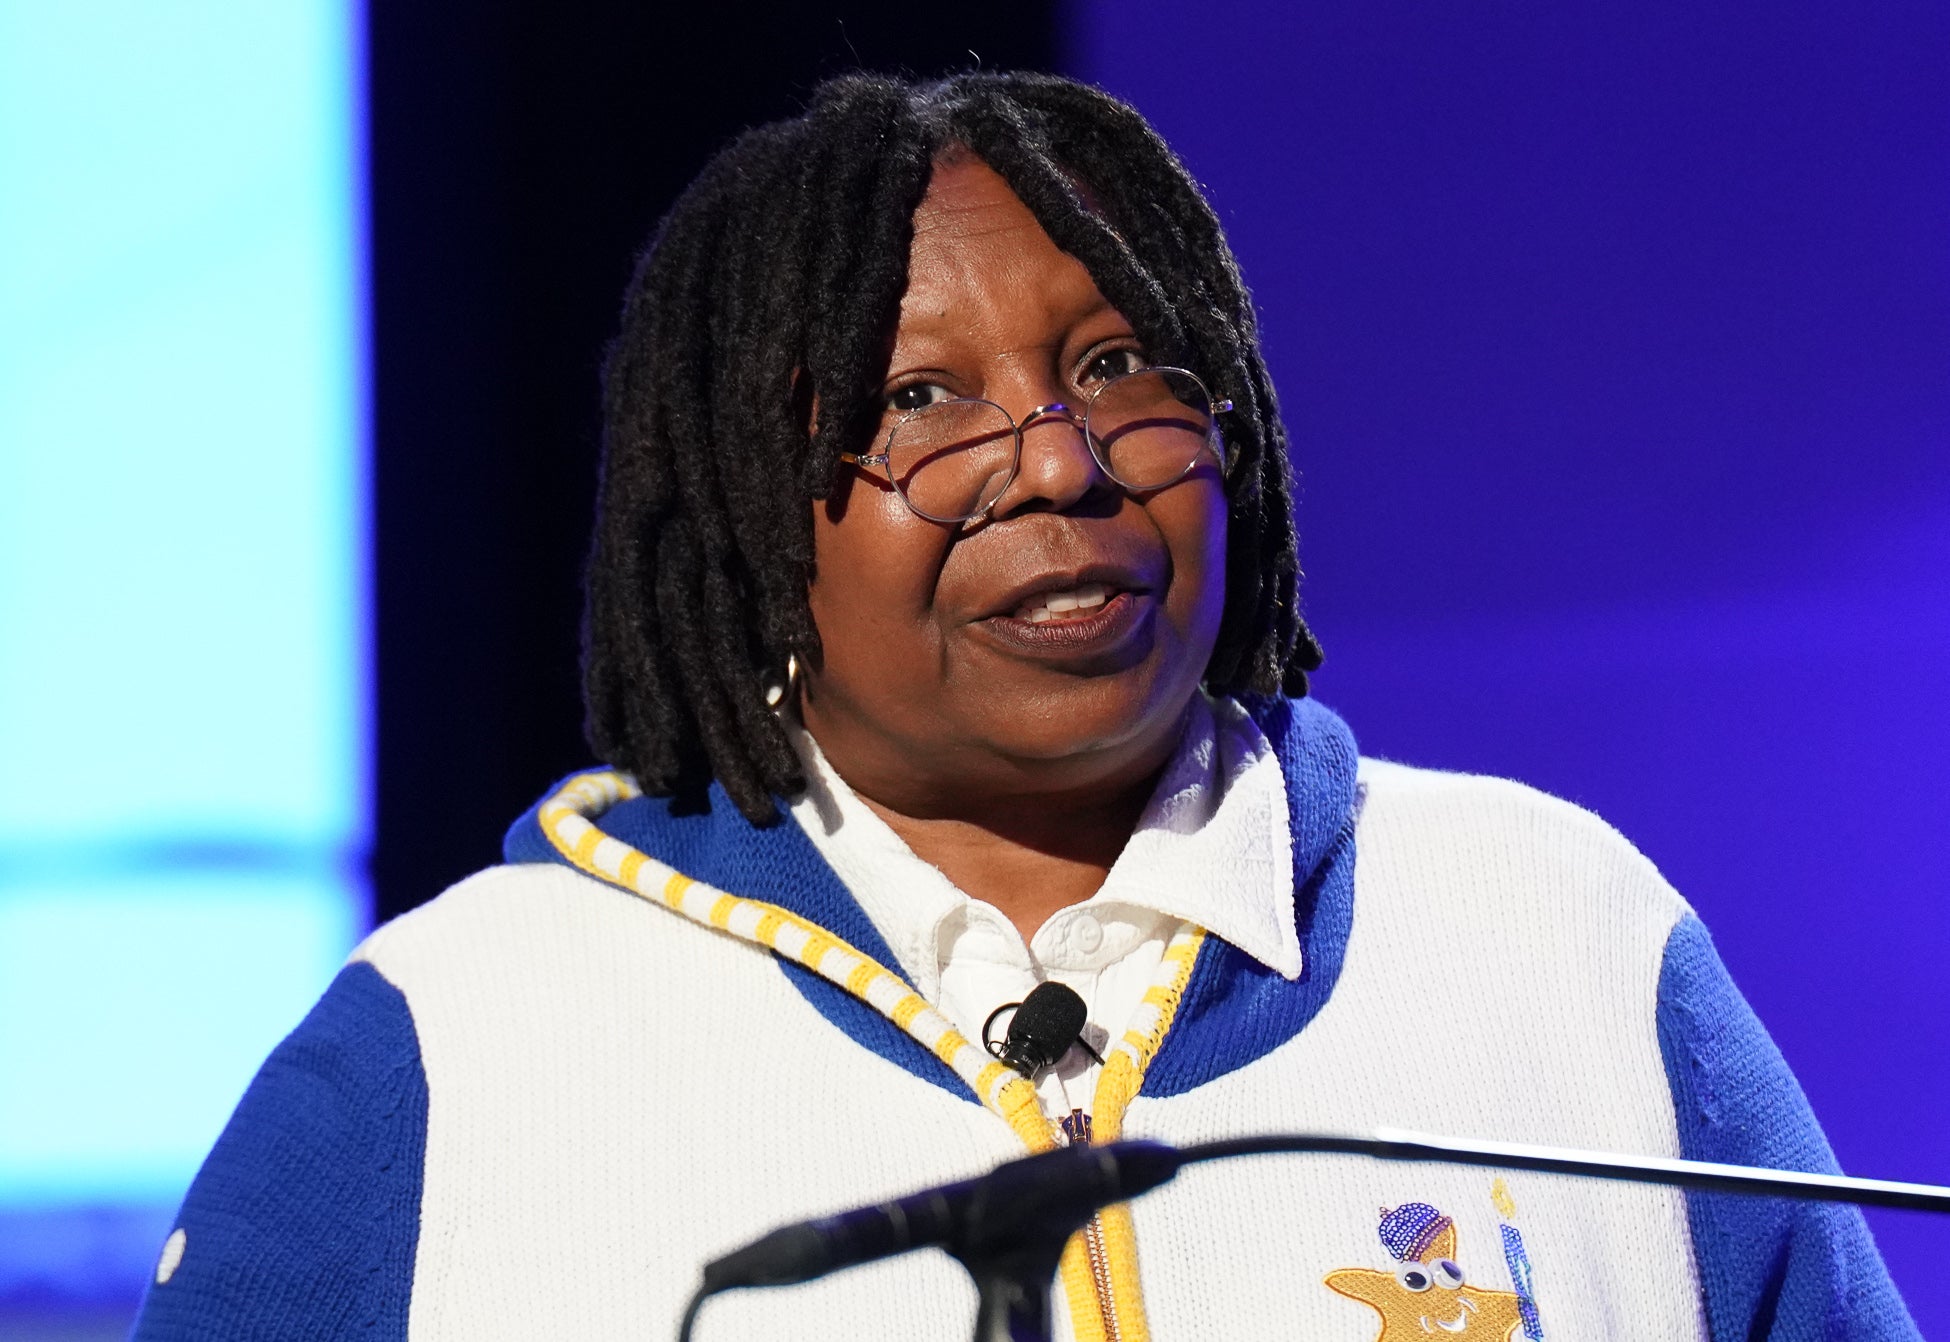 Whoopi Goldberg Suspended From ‘The View’ Over Classifying The Holocaust As “Evil” Rather Than “Racial”